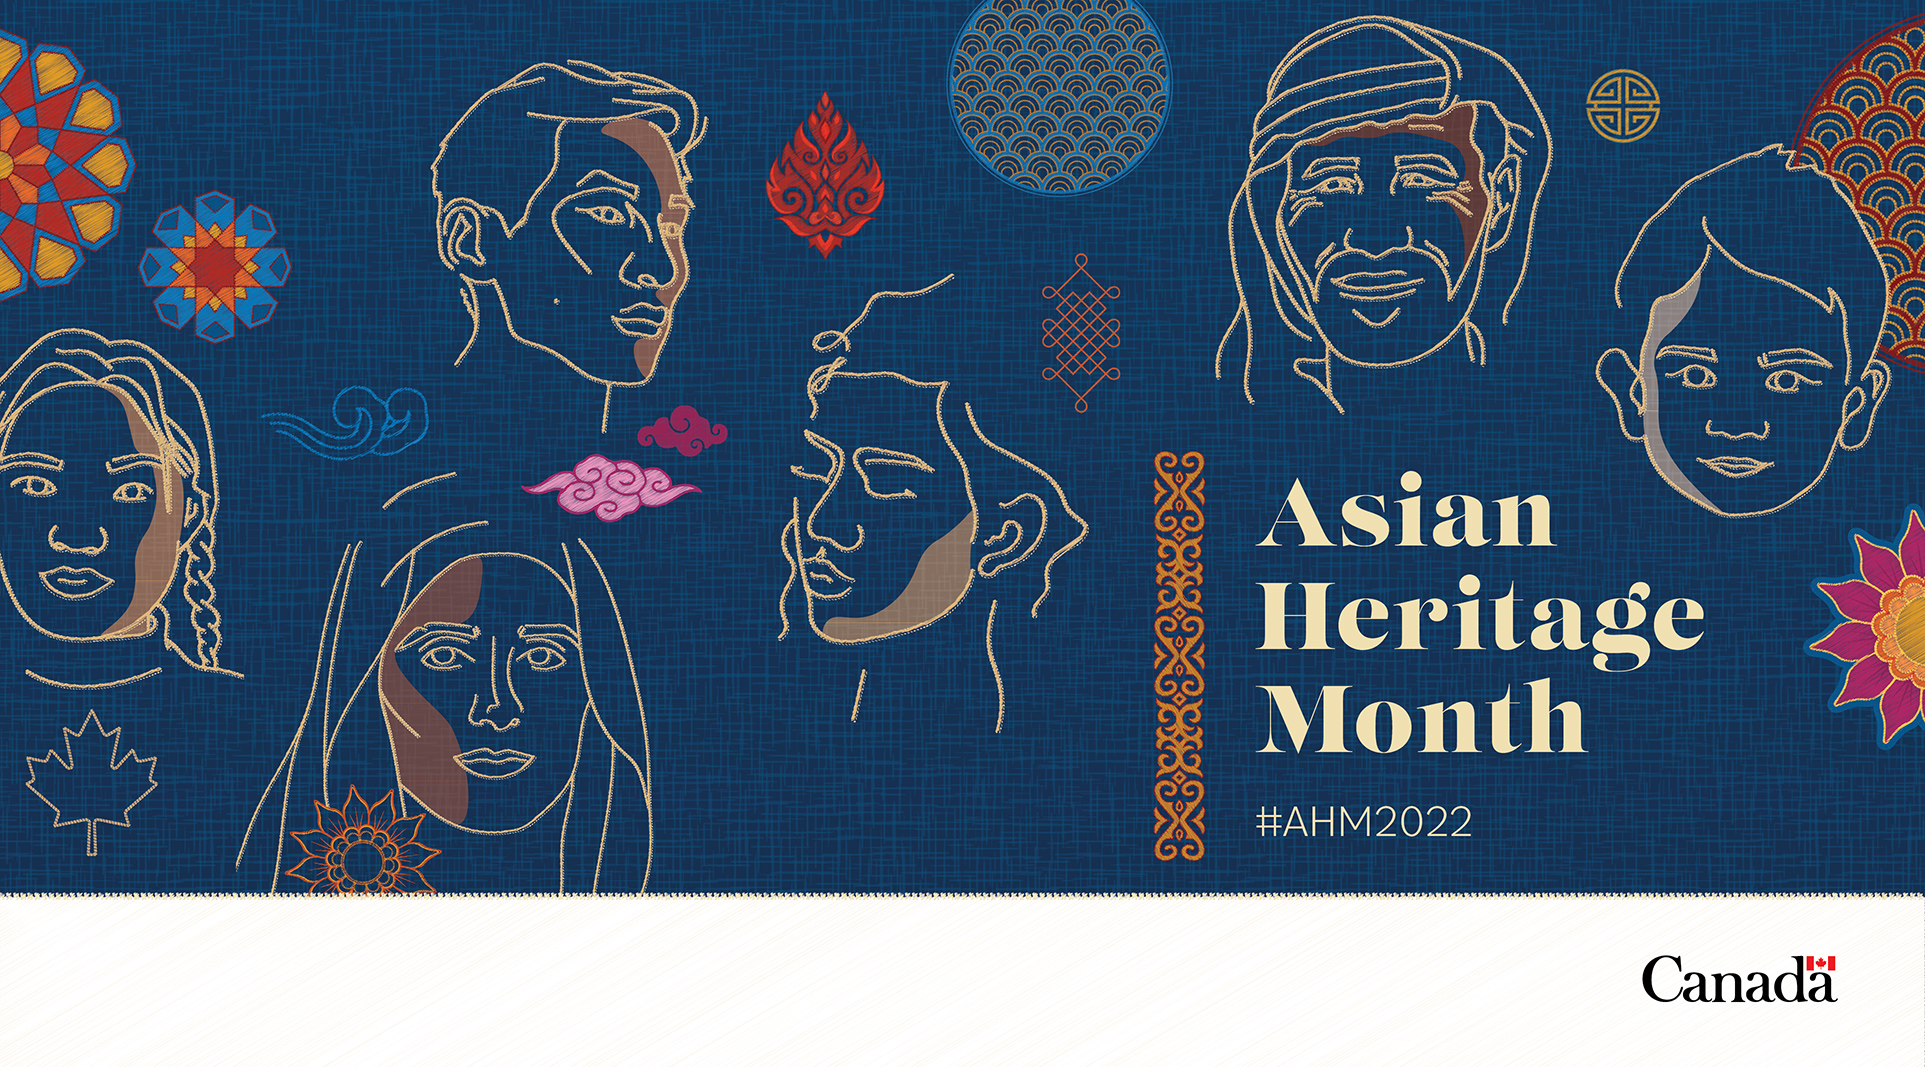 https://www.canada.ca/content/dam/pch/images/campaigns/asian-heritage-month/2022/toolkit/ahm-2022-fbtwittterlkin-en.jpg